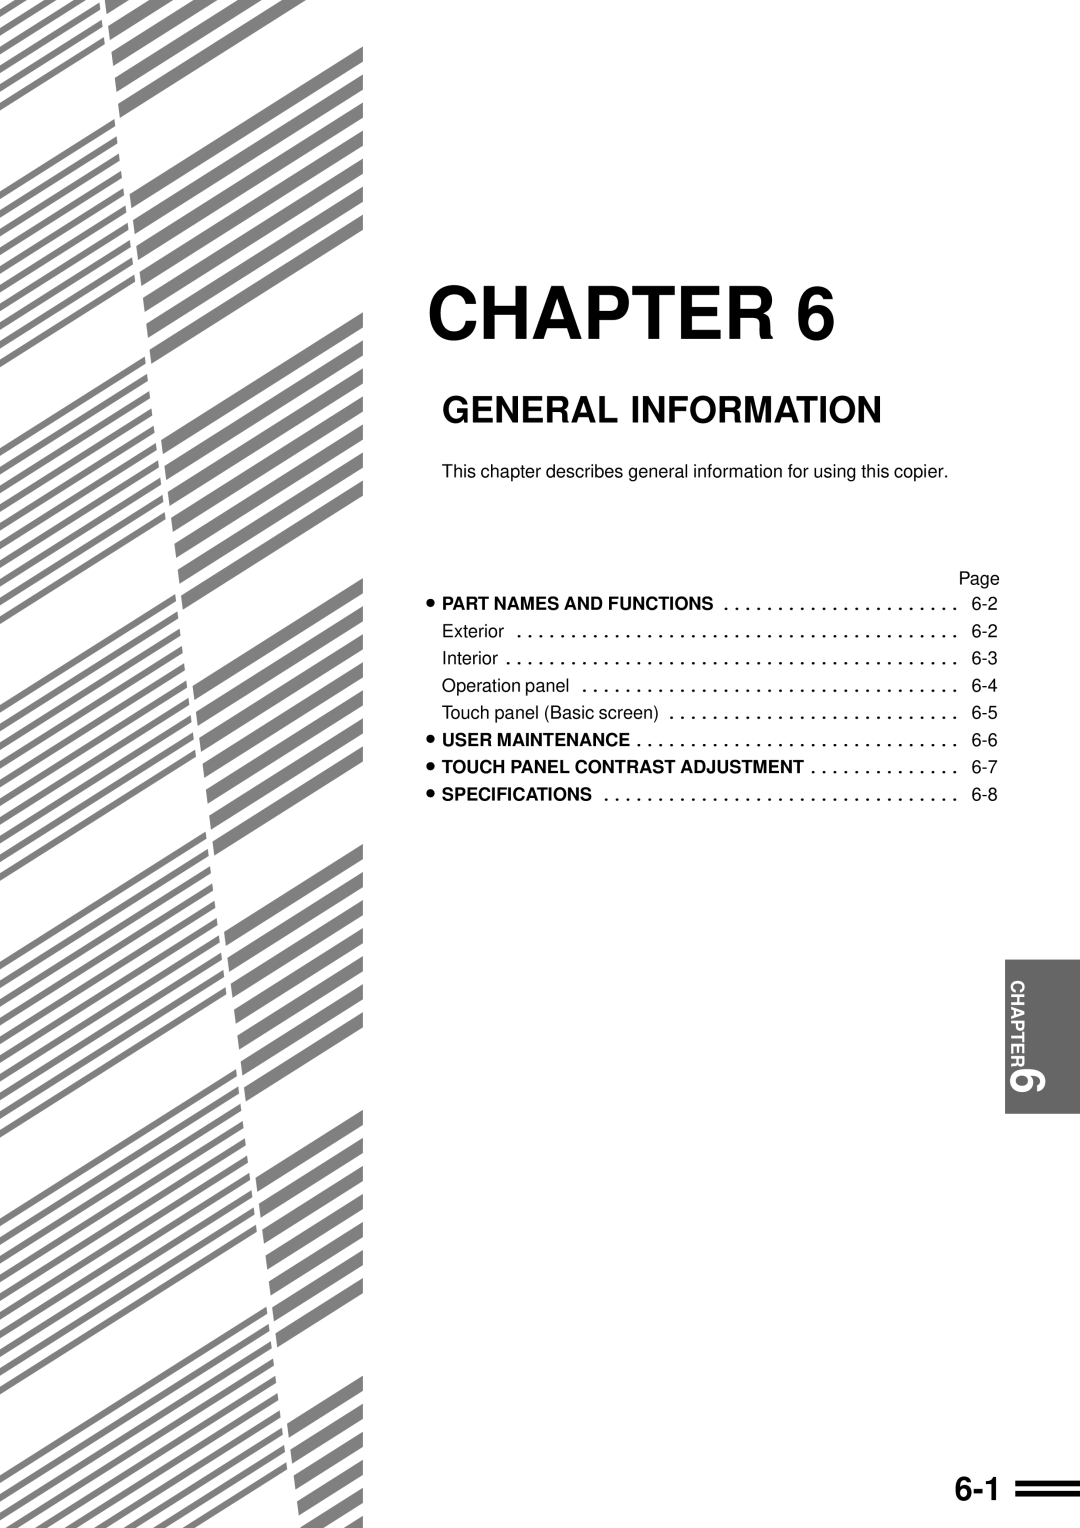 Sharp AR-507 General Information, Chapter, Part Names And Functions, Exterior, Interior, Operation panel, User Maintenance 